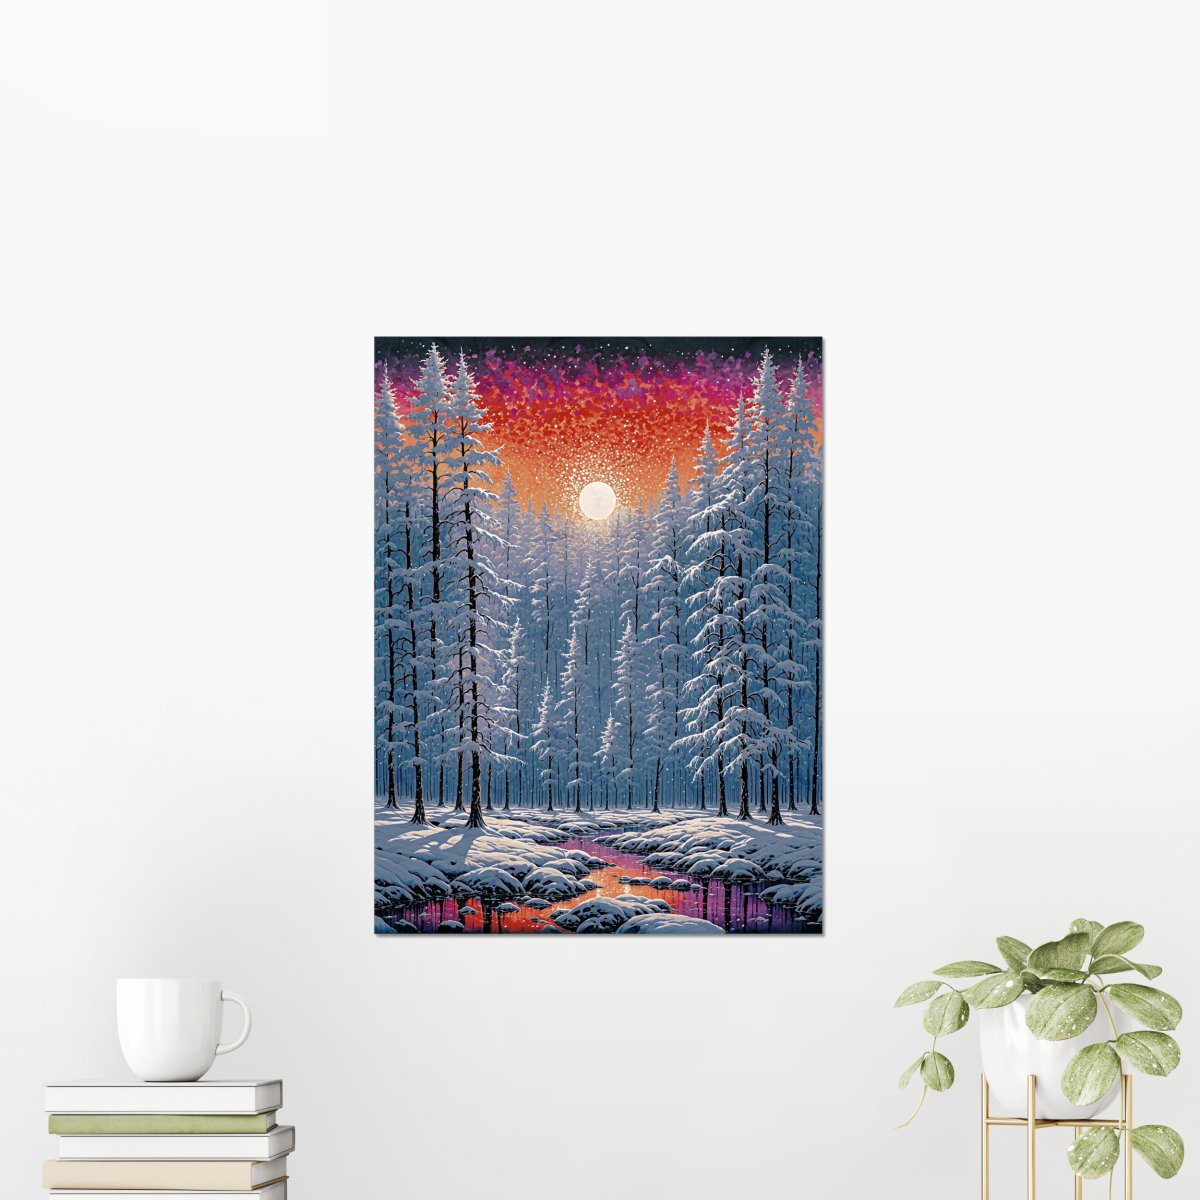 Frosty spring - Art print - Poster - Ever colorful